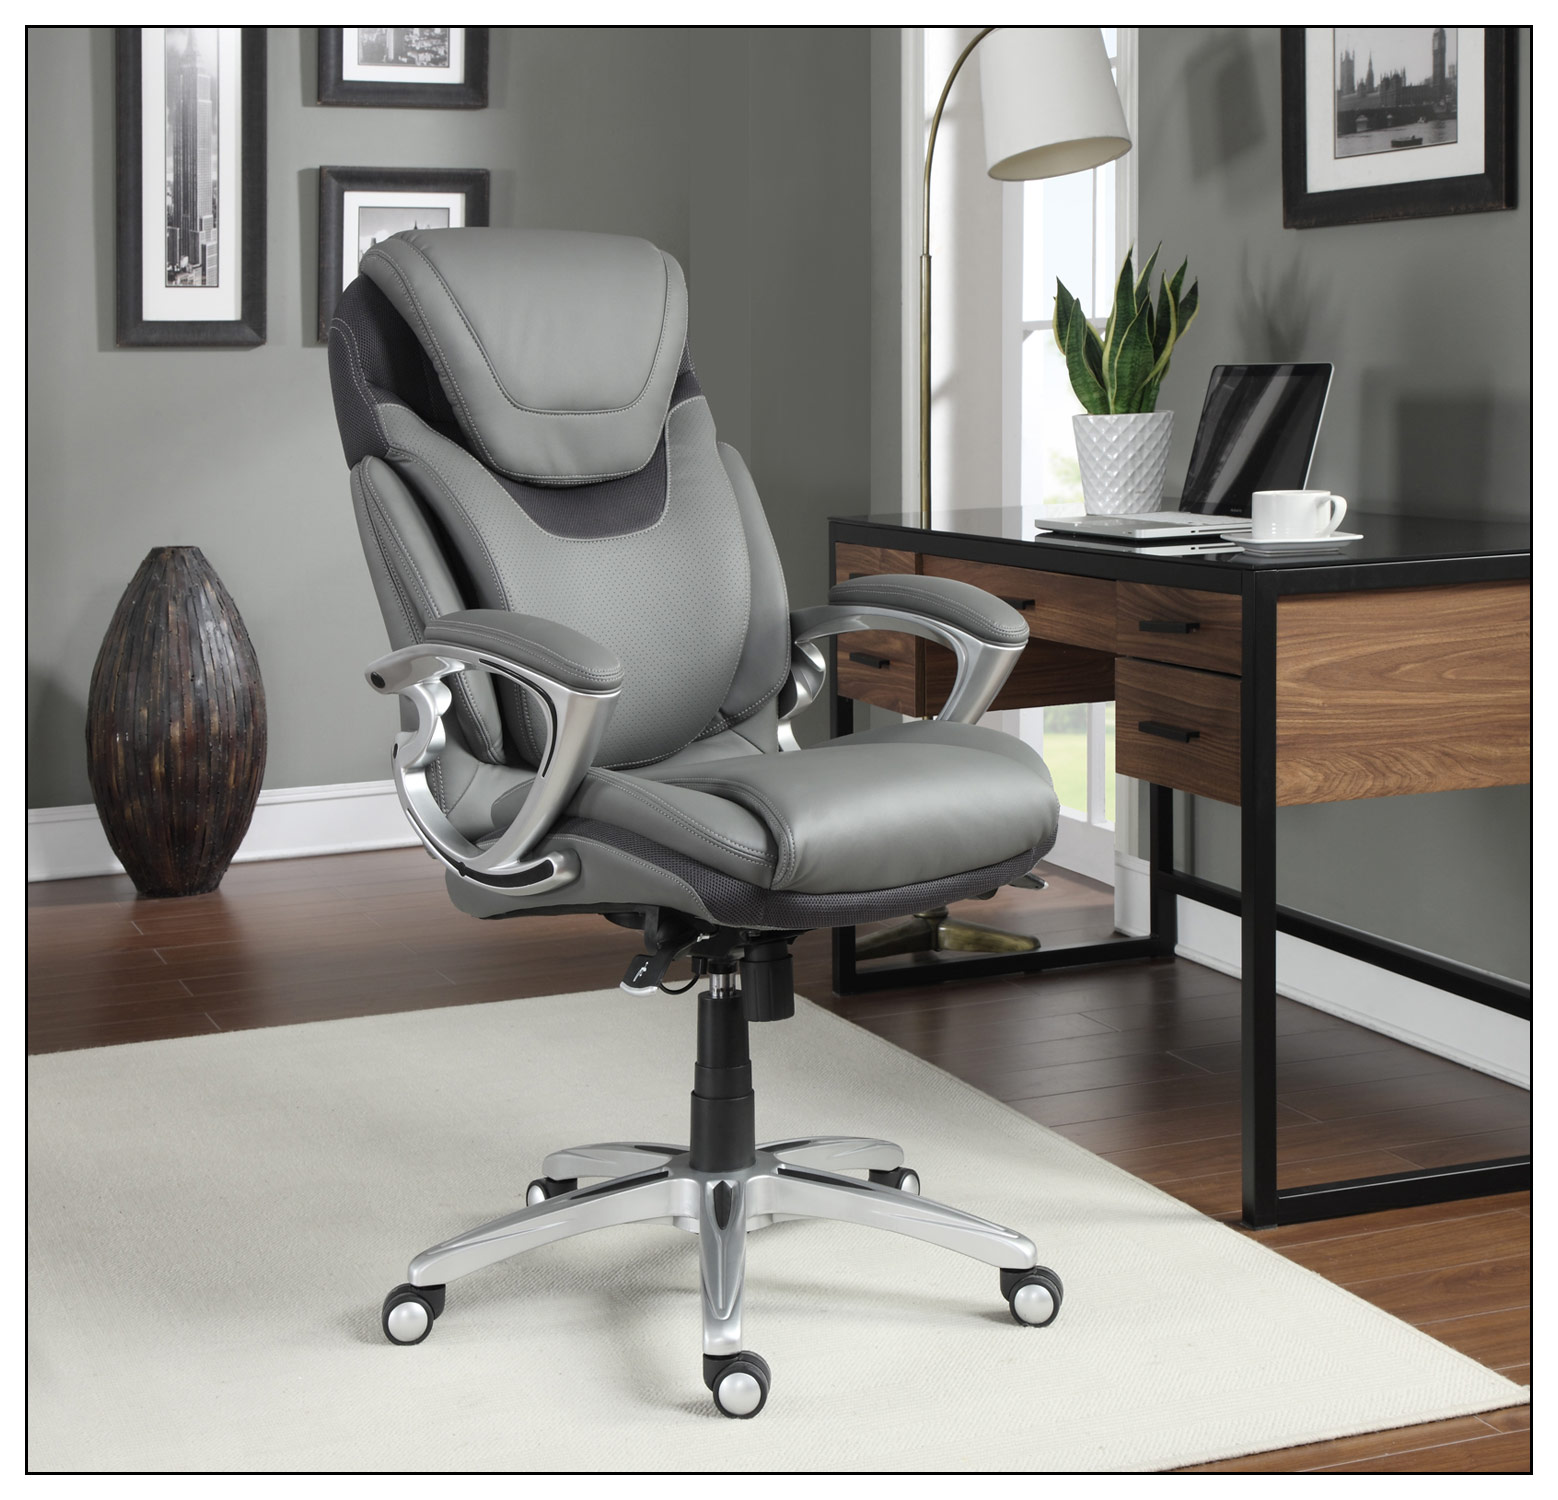 Inc Roasted Chestnut Millwork Holdings Co 43809 Big and Tall Serta Air Health and Wellness Executive Office Chair 